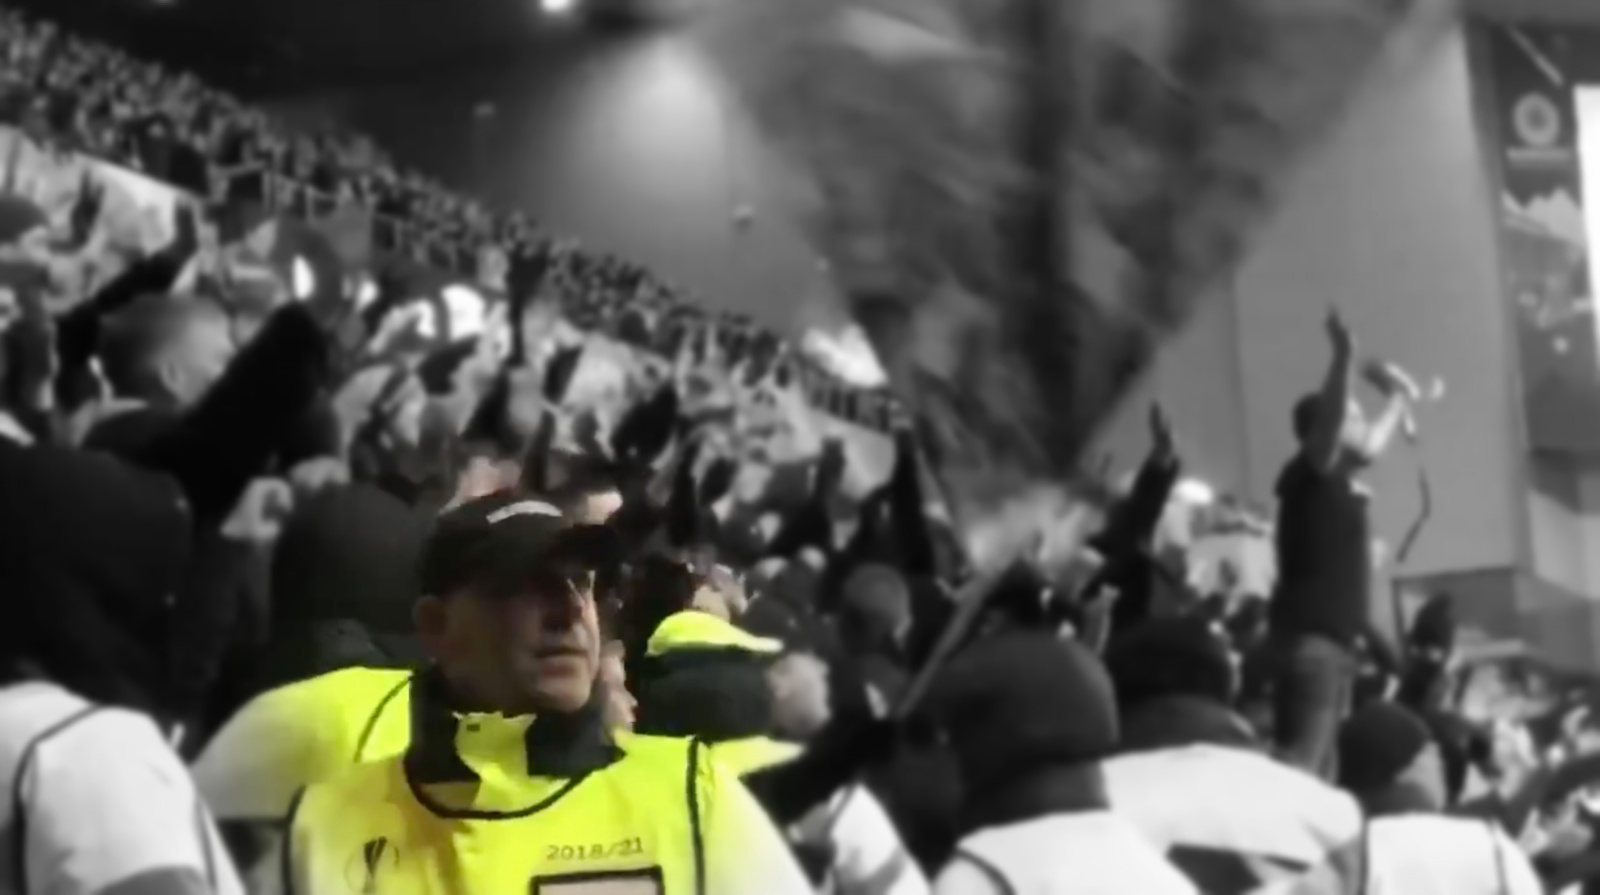 Footage of a steward soaking in the atmosphere inside Ibrox goes viral after Rangers v Braga